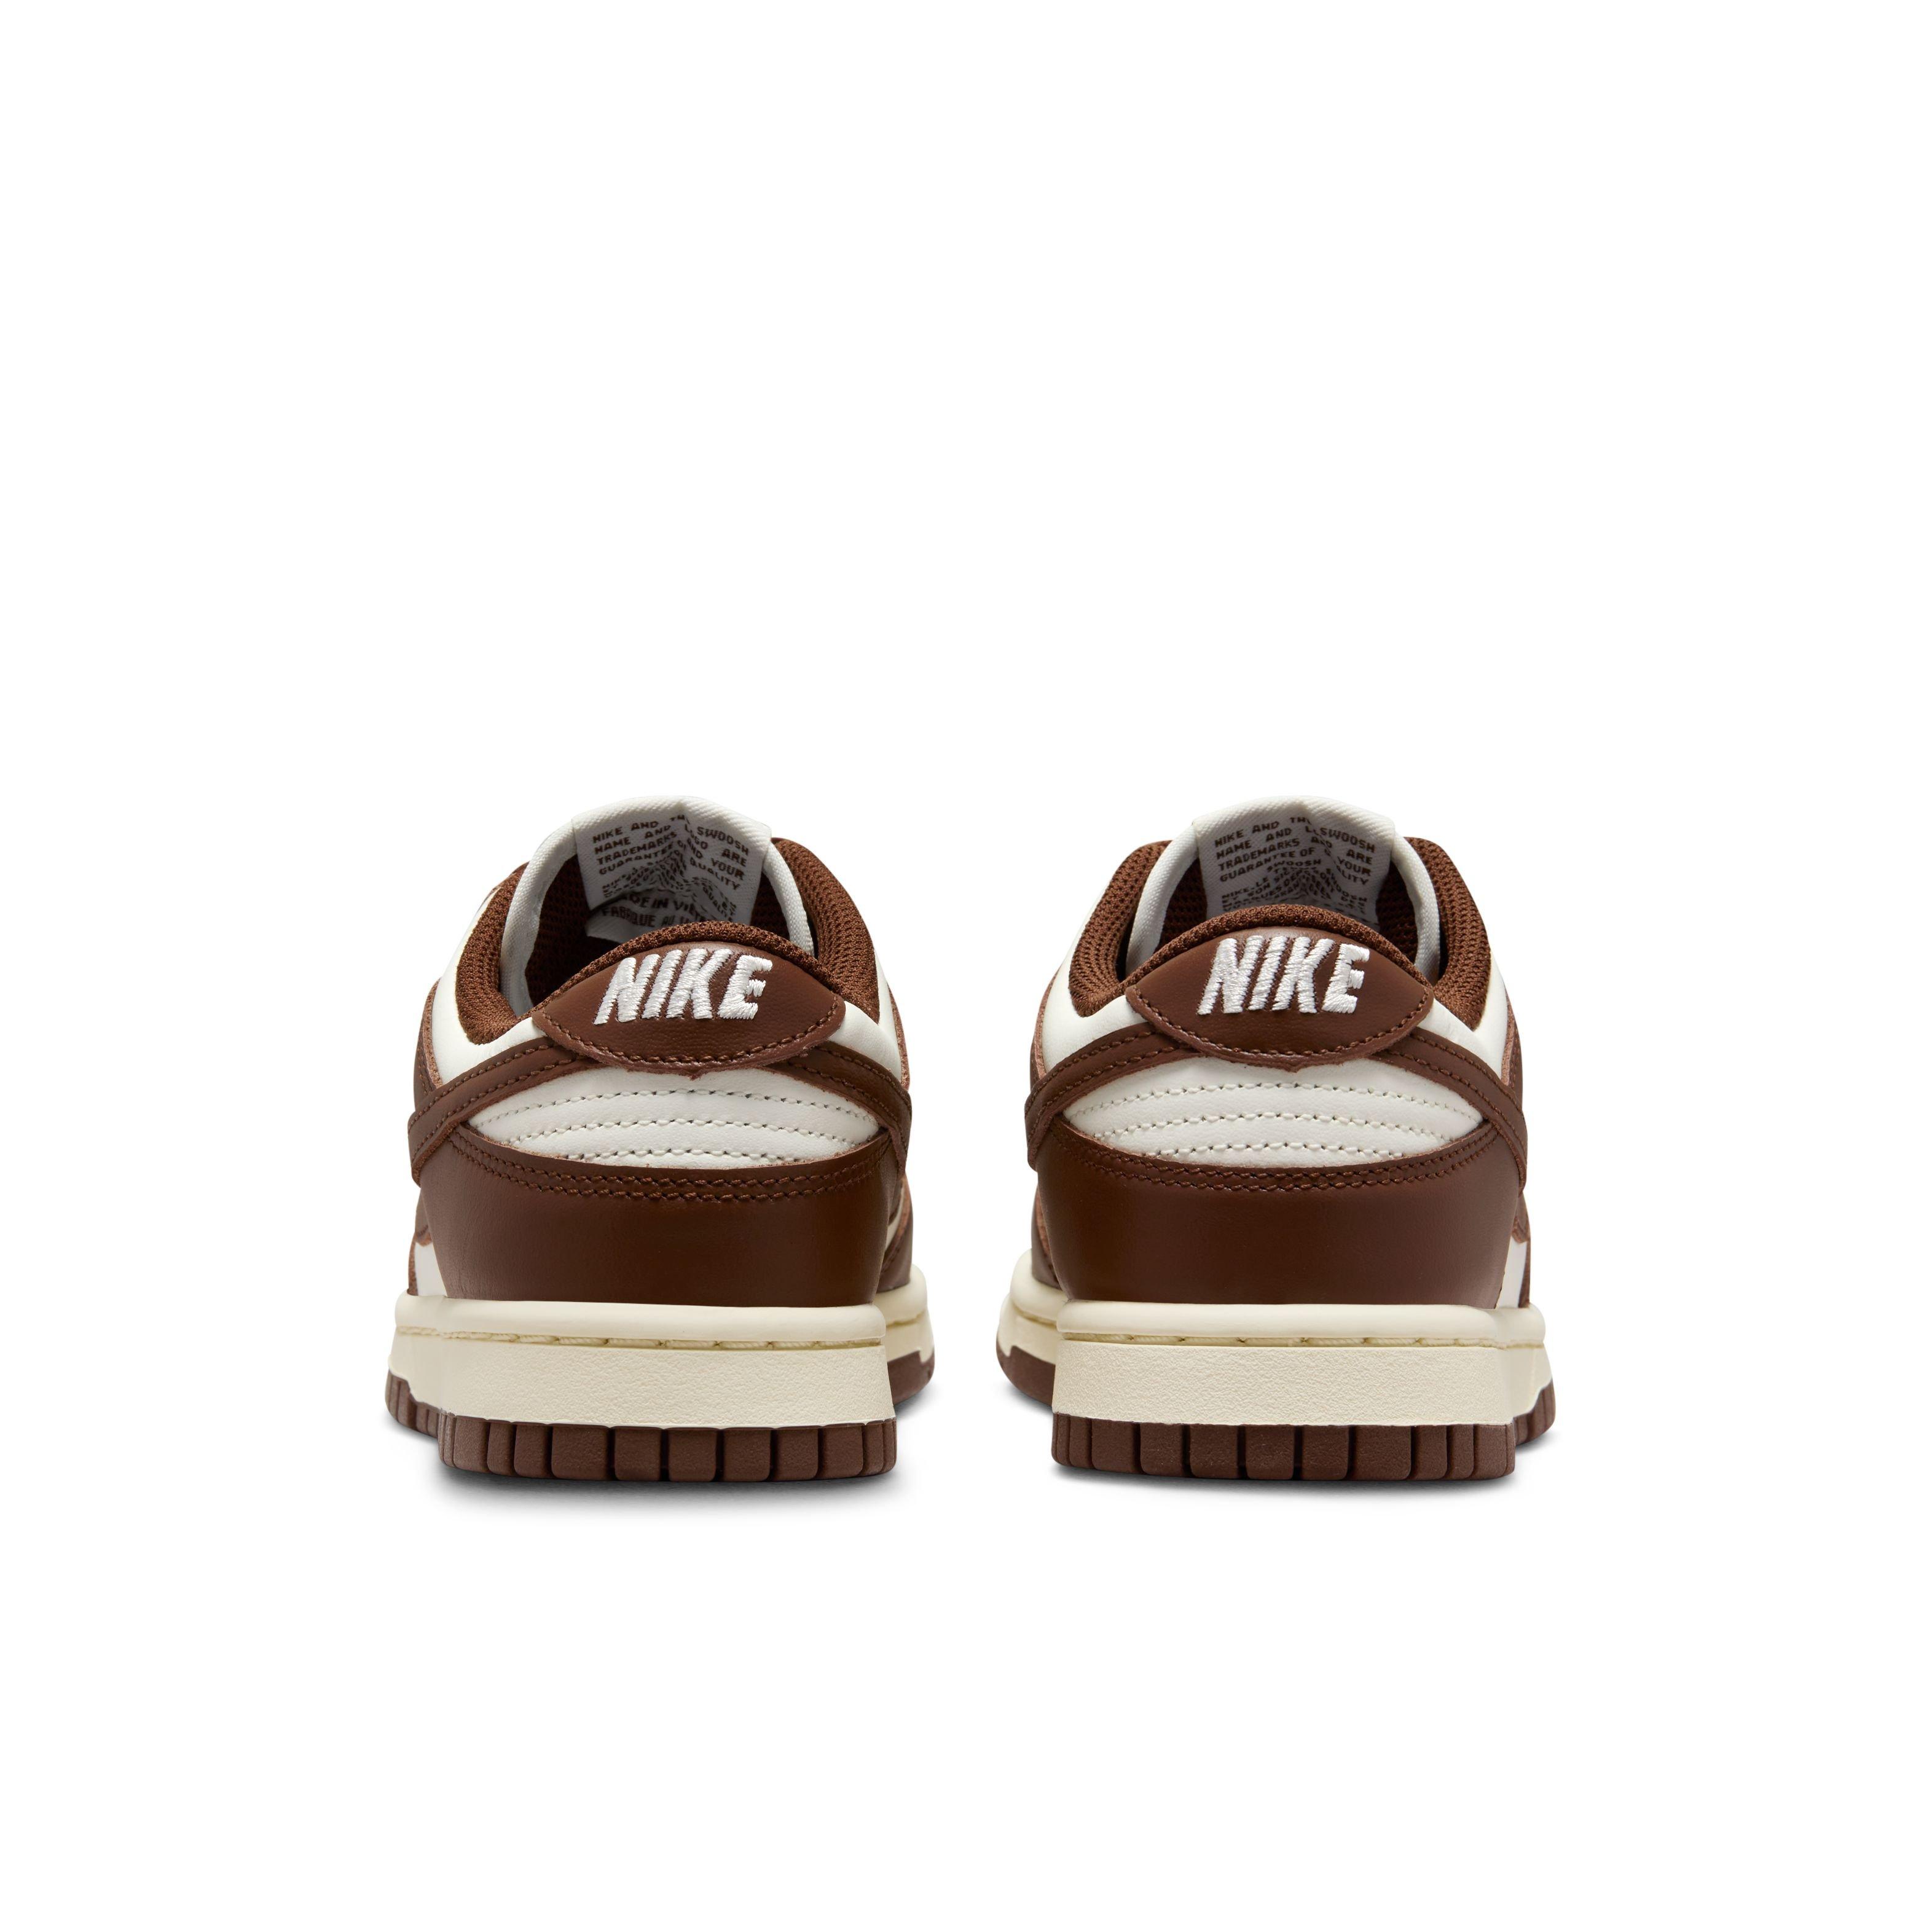 dunk low cacao wow